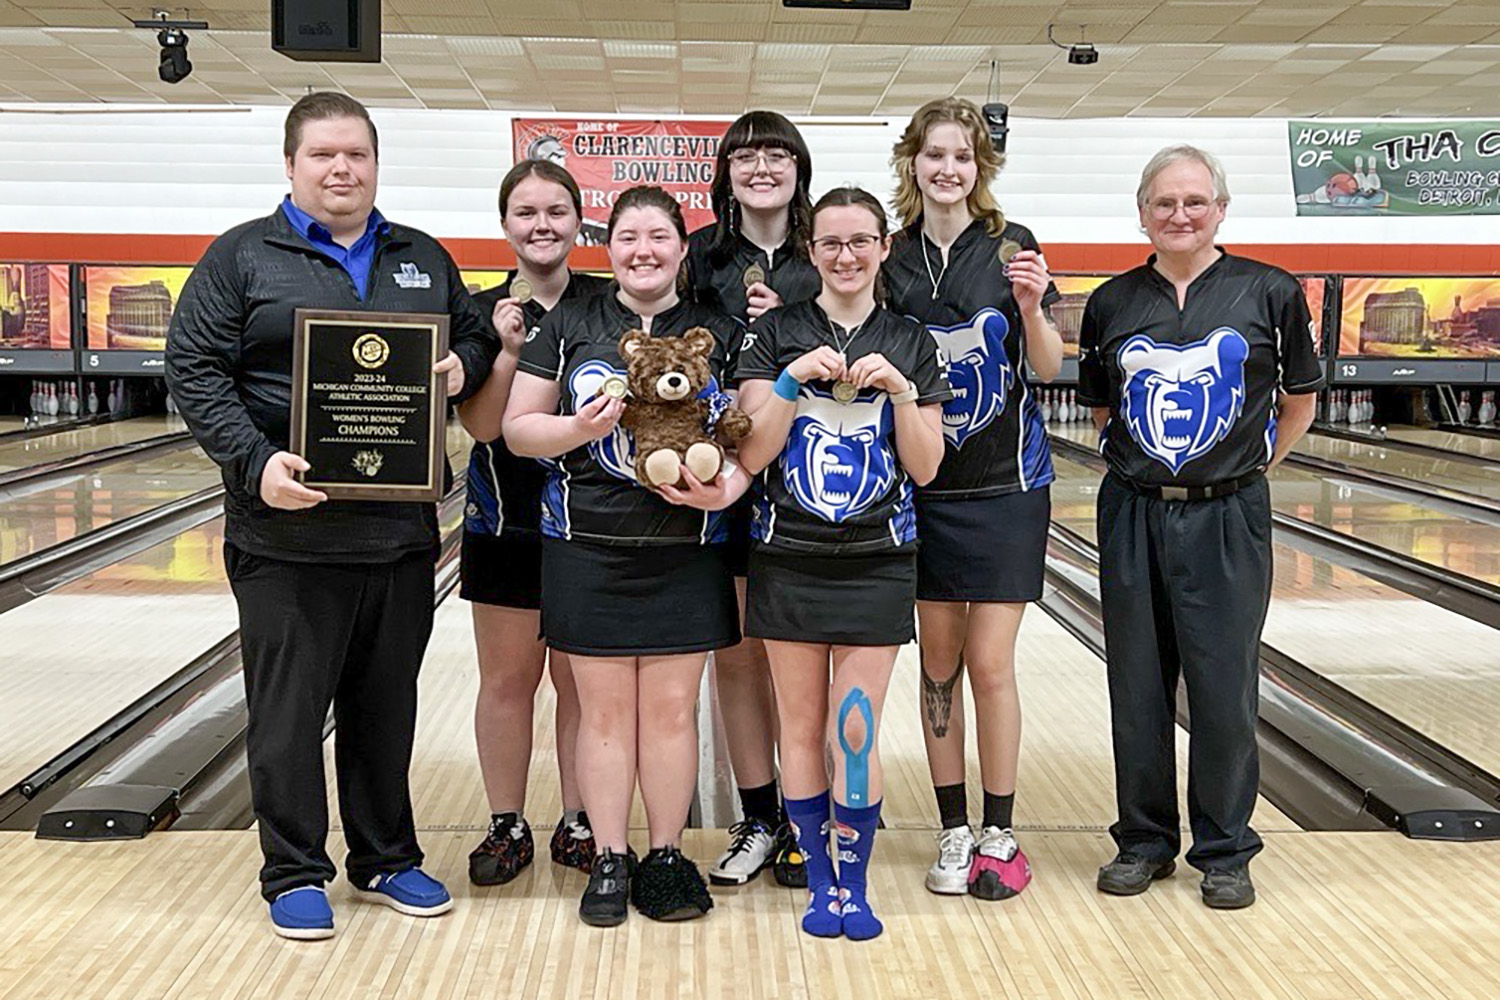 The women's bowling team and coaches pose with awards in a bowling alley.